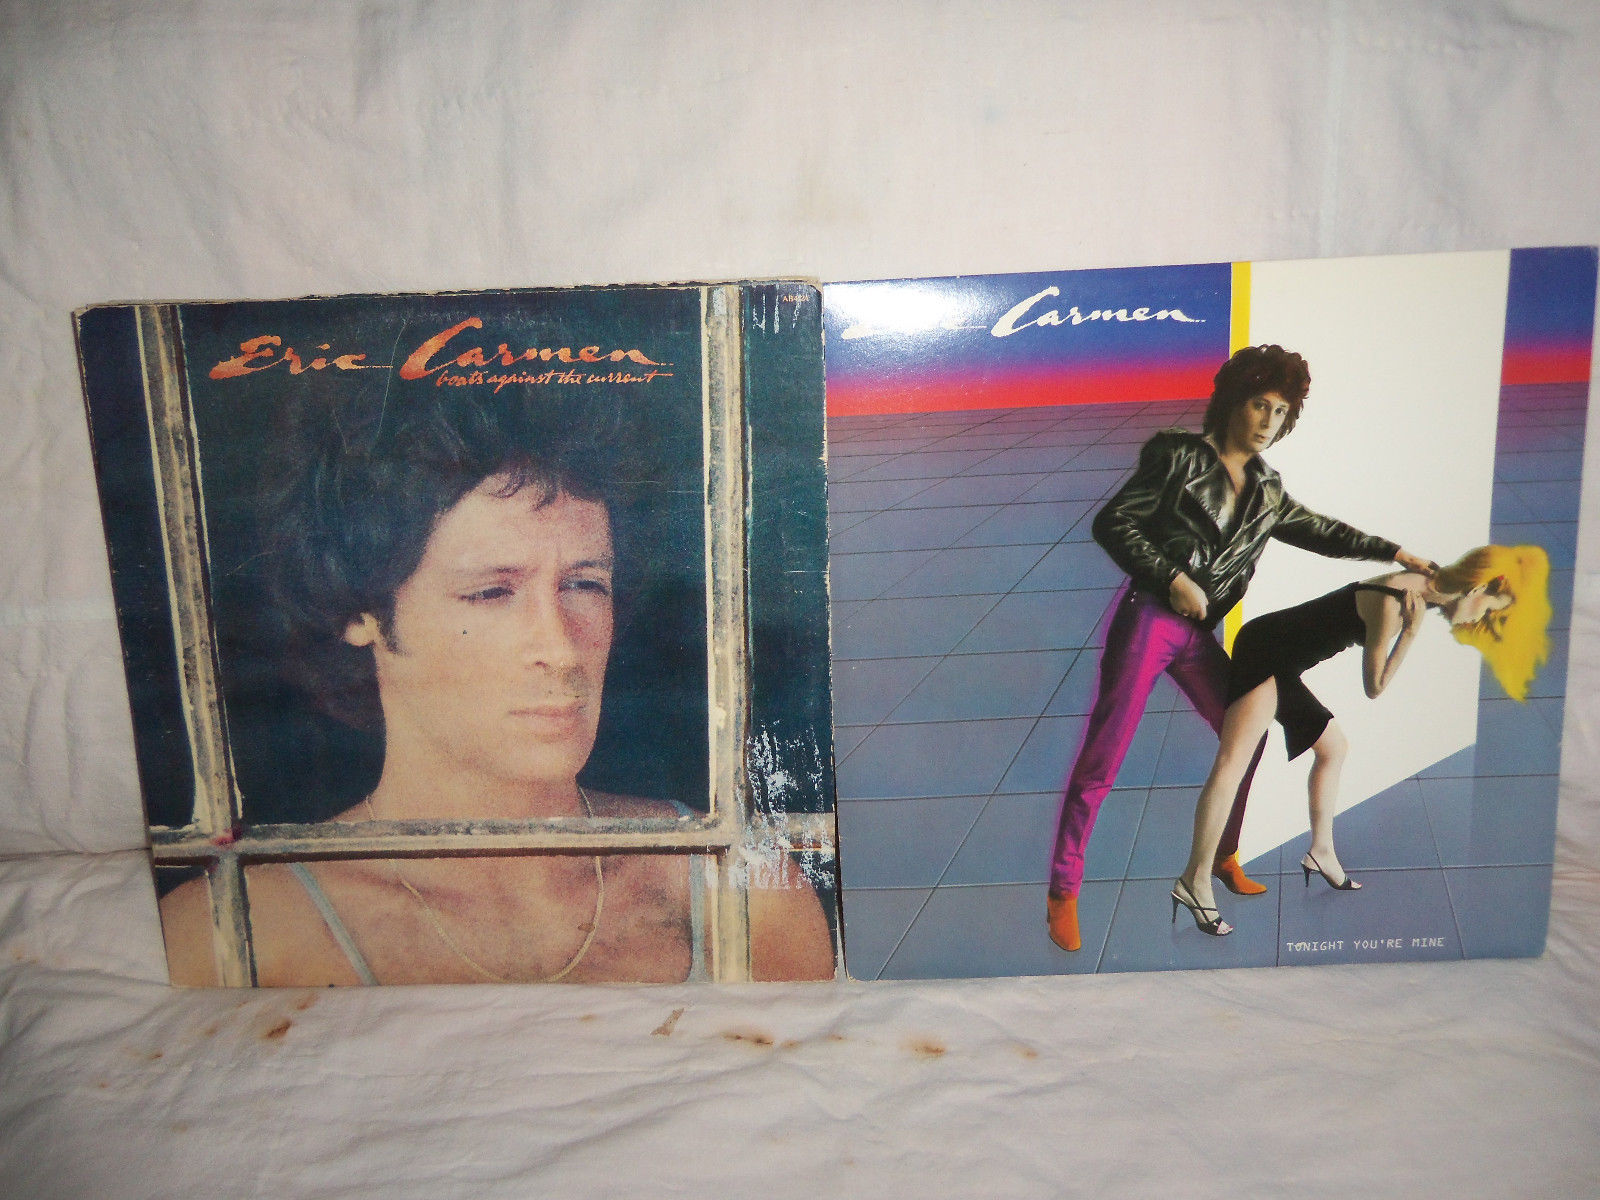 2 Eric Carmen Albums, Boats Against The Current & Tonight - Eric Carmen Tonight You Re Mine Album Cover , HD Wallpaper & Backgrounds